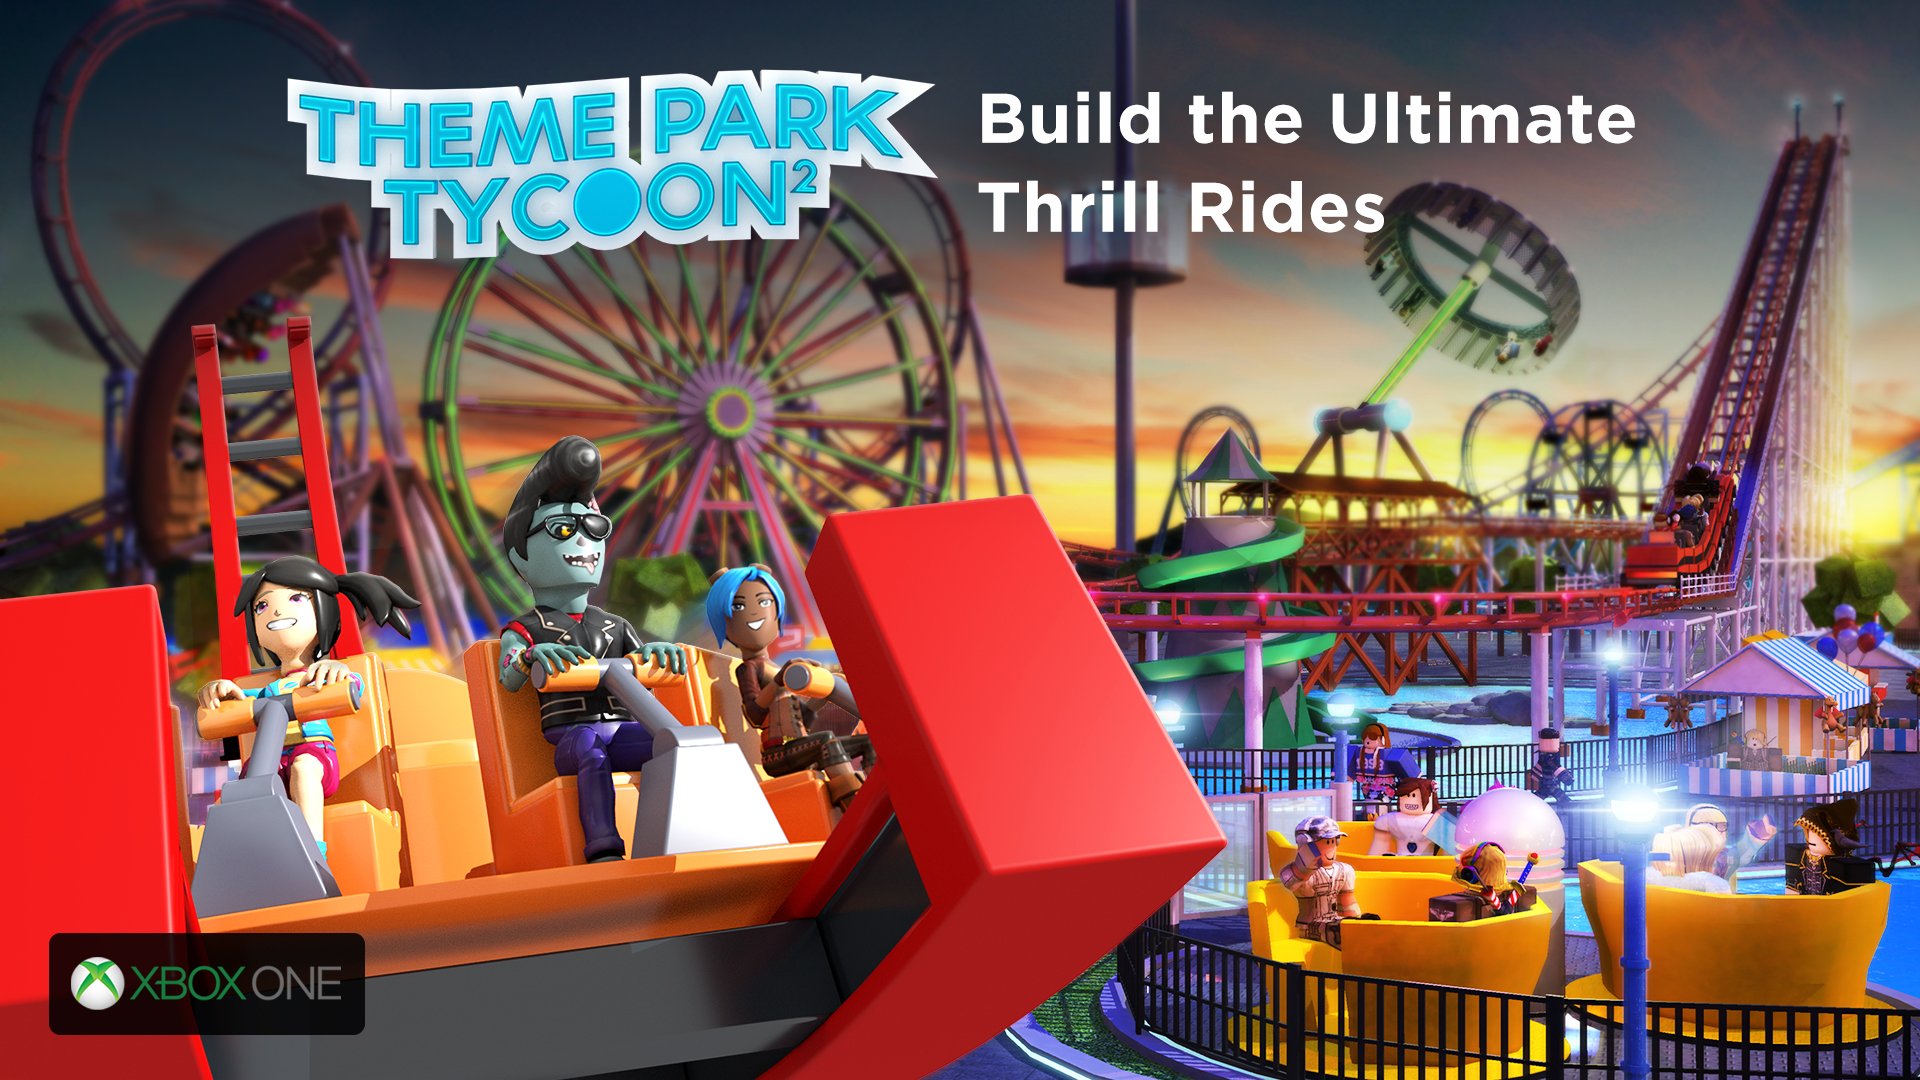 Roblox On Twitter Hold On Tight To The Controller The High Speed Drops Loops And Thrills Of Theme Park Tycoon 2 Are Now Available On Xbox Https T Co G1osqtfmlt Https T Co 04q9k5gfeb - remove ride theme park tycoon roblox